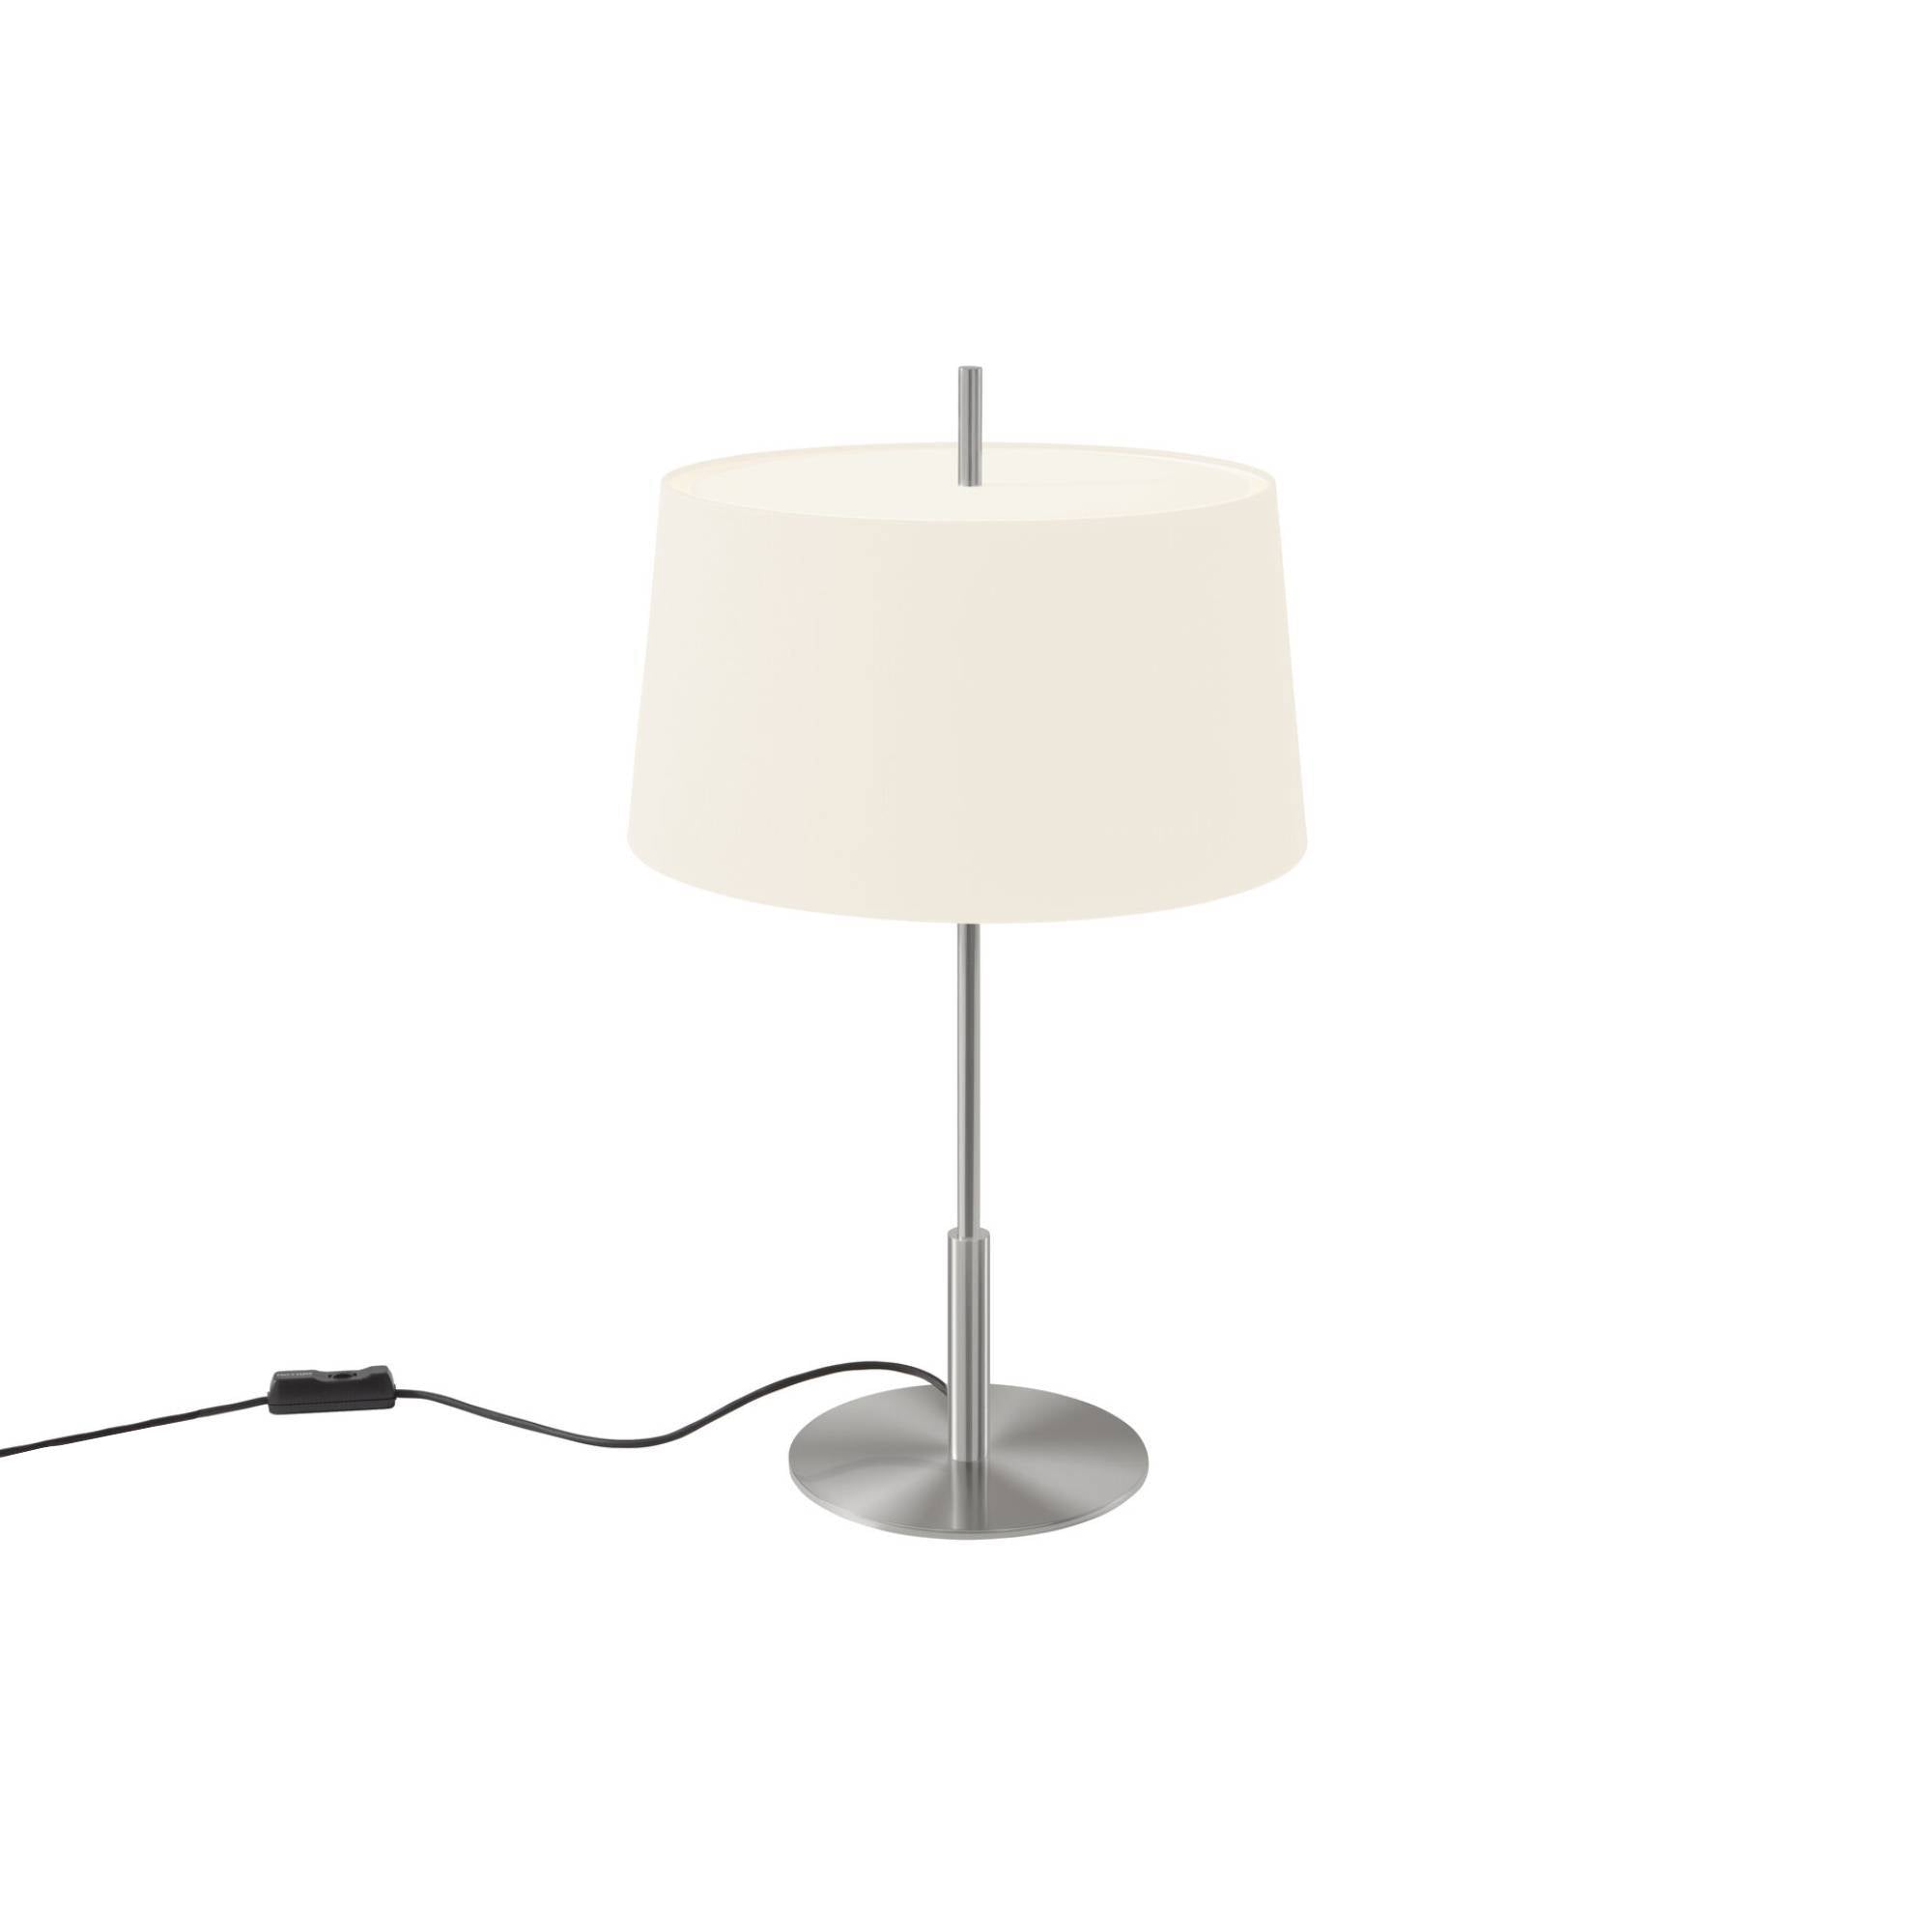 Diana Table Lamp: Large - 30.7